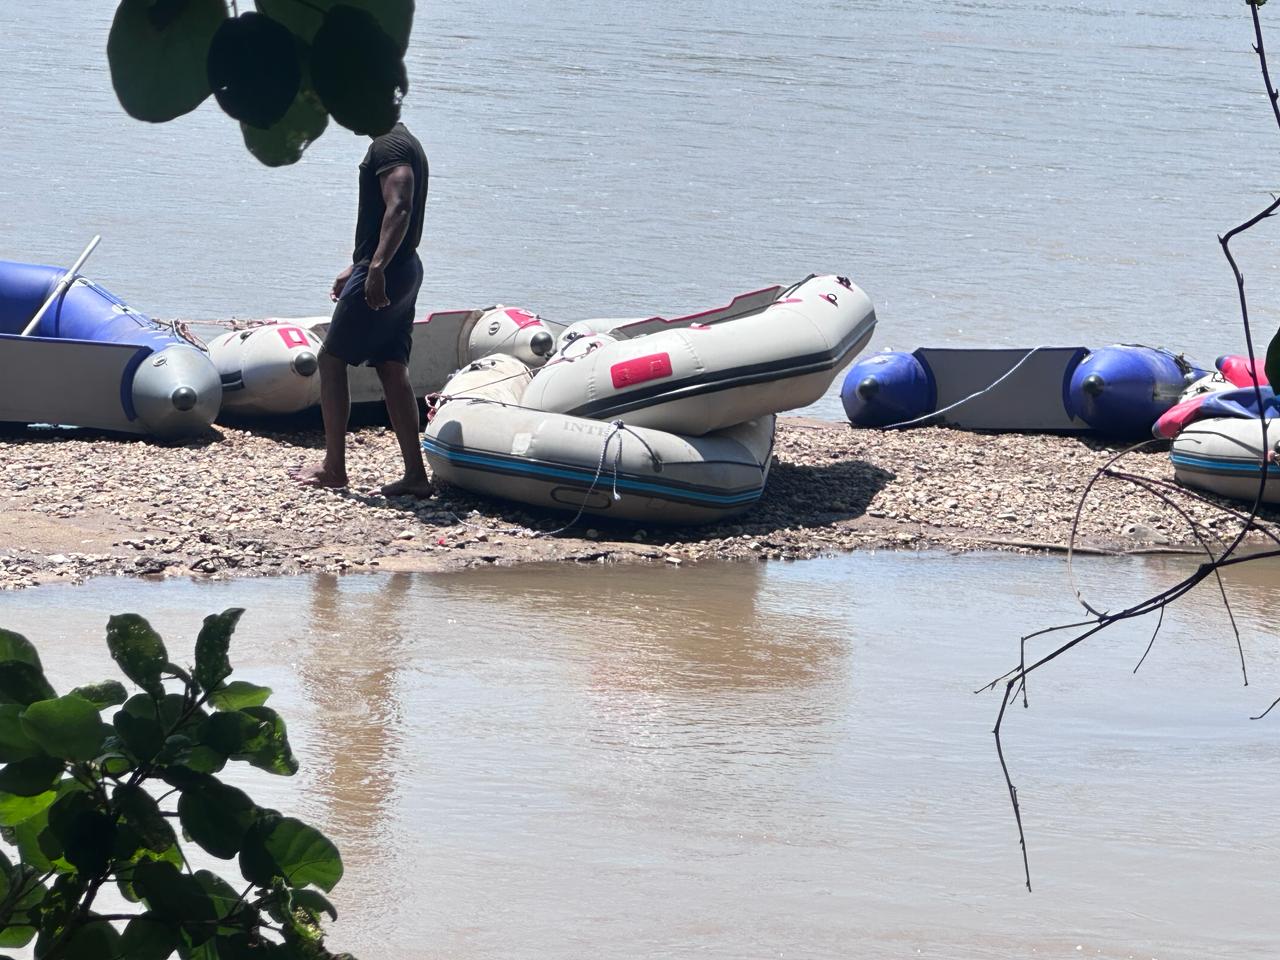 Three suspected illegal miners apprehended and nine inflatable boats sized during disruptive operation Vala Umgodi